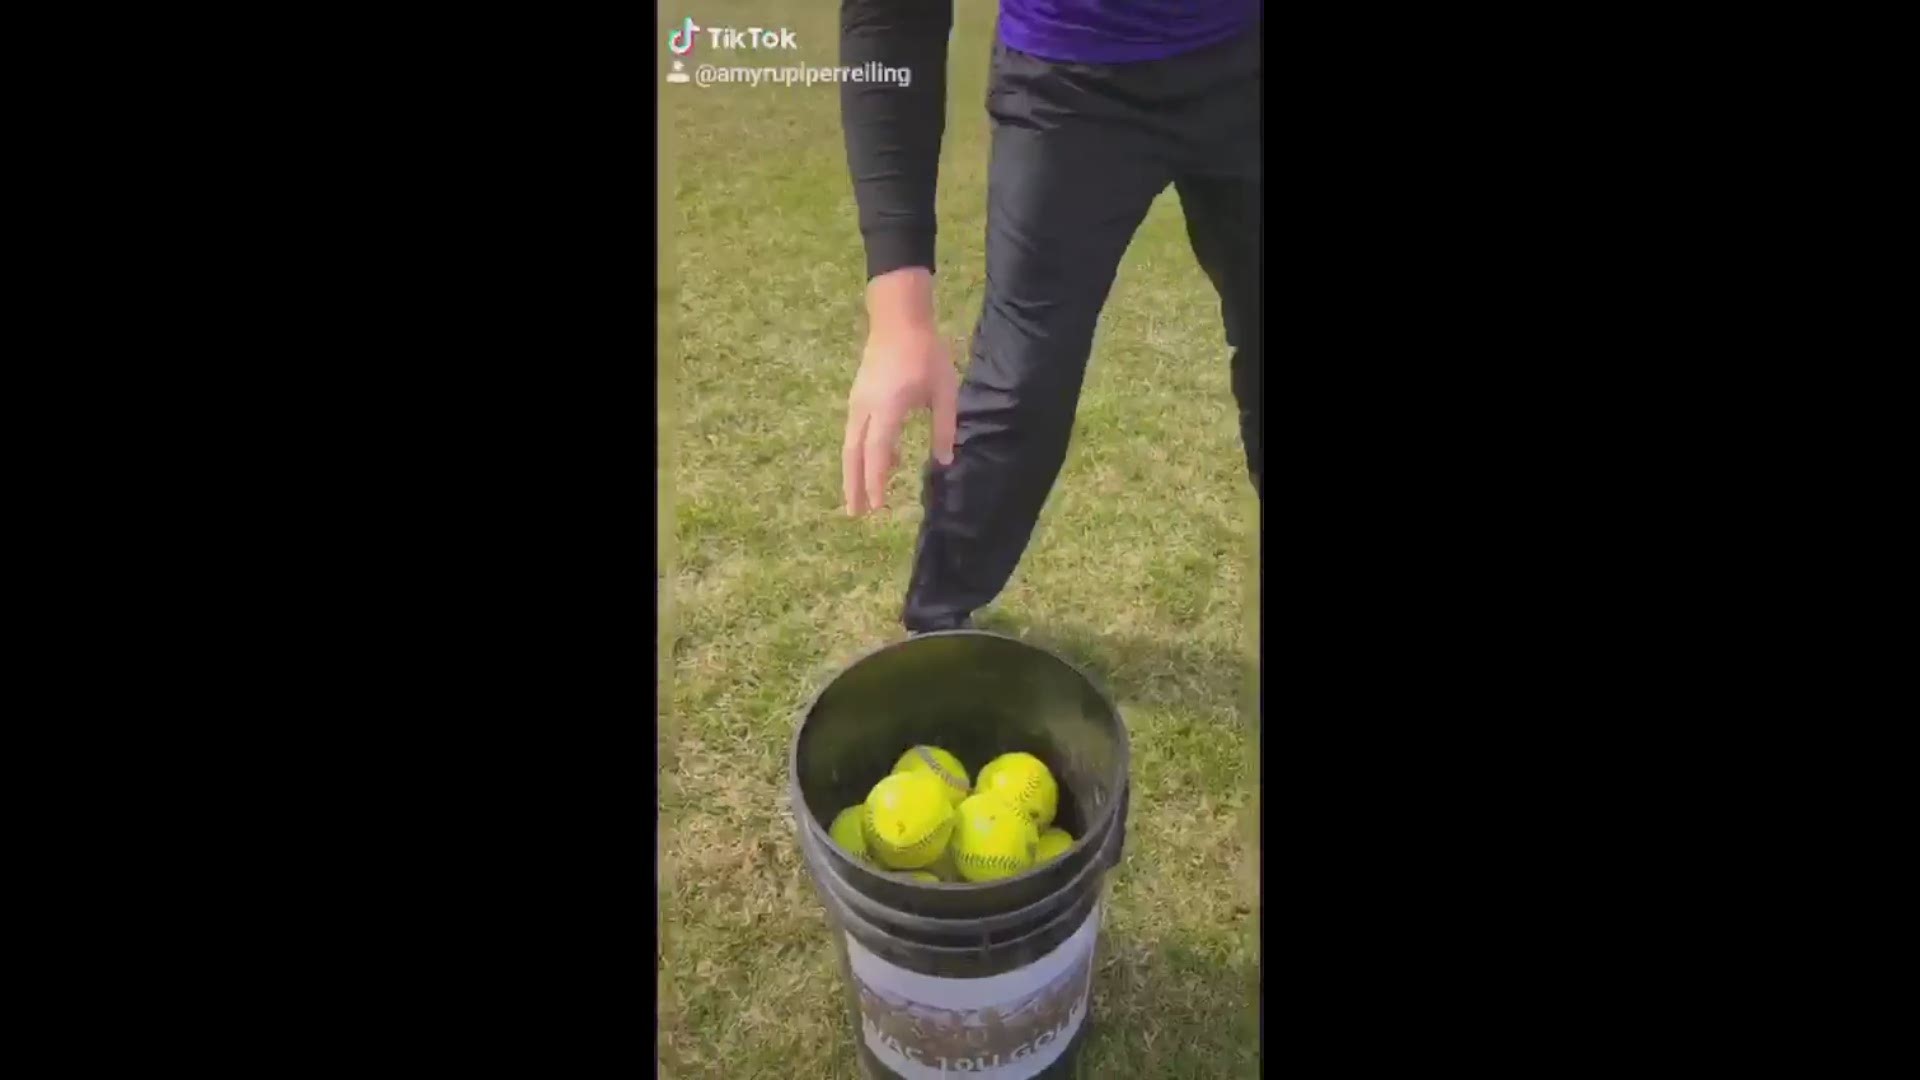 Waukee softball team gets creative while they can't practice